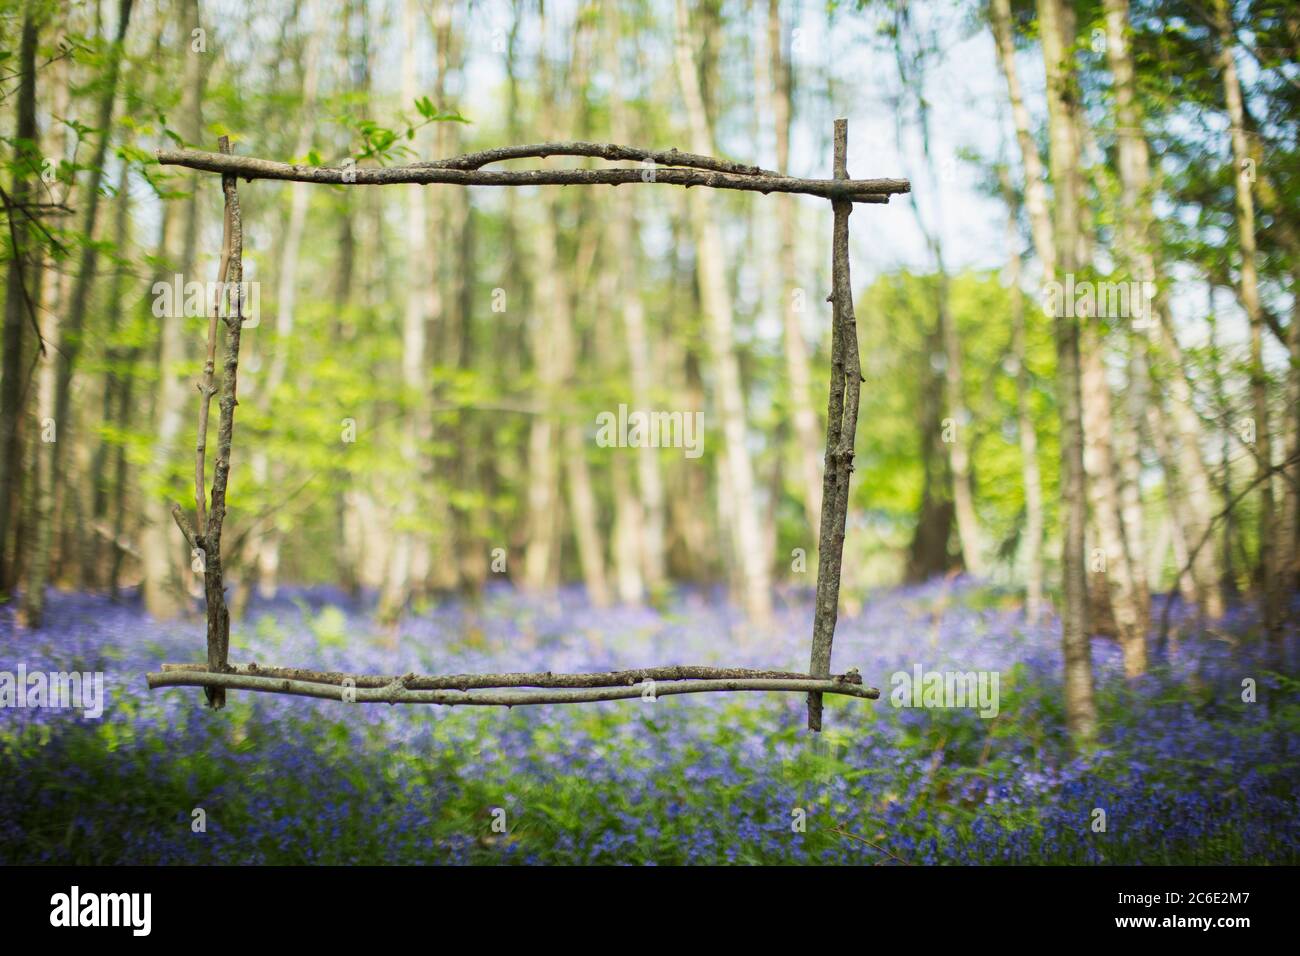 Wood stick frame over idyllic bluebell flowers in woods Stock Photo